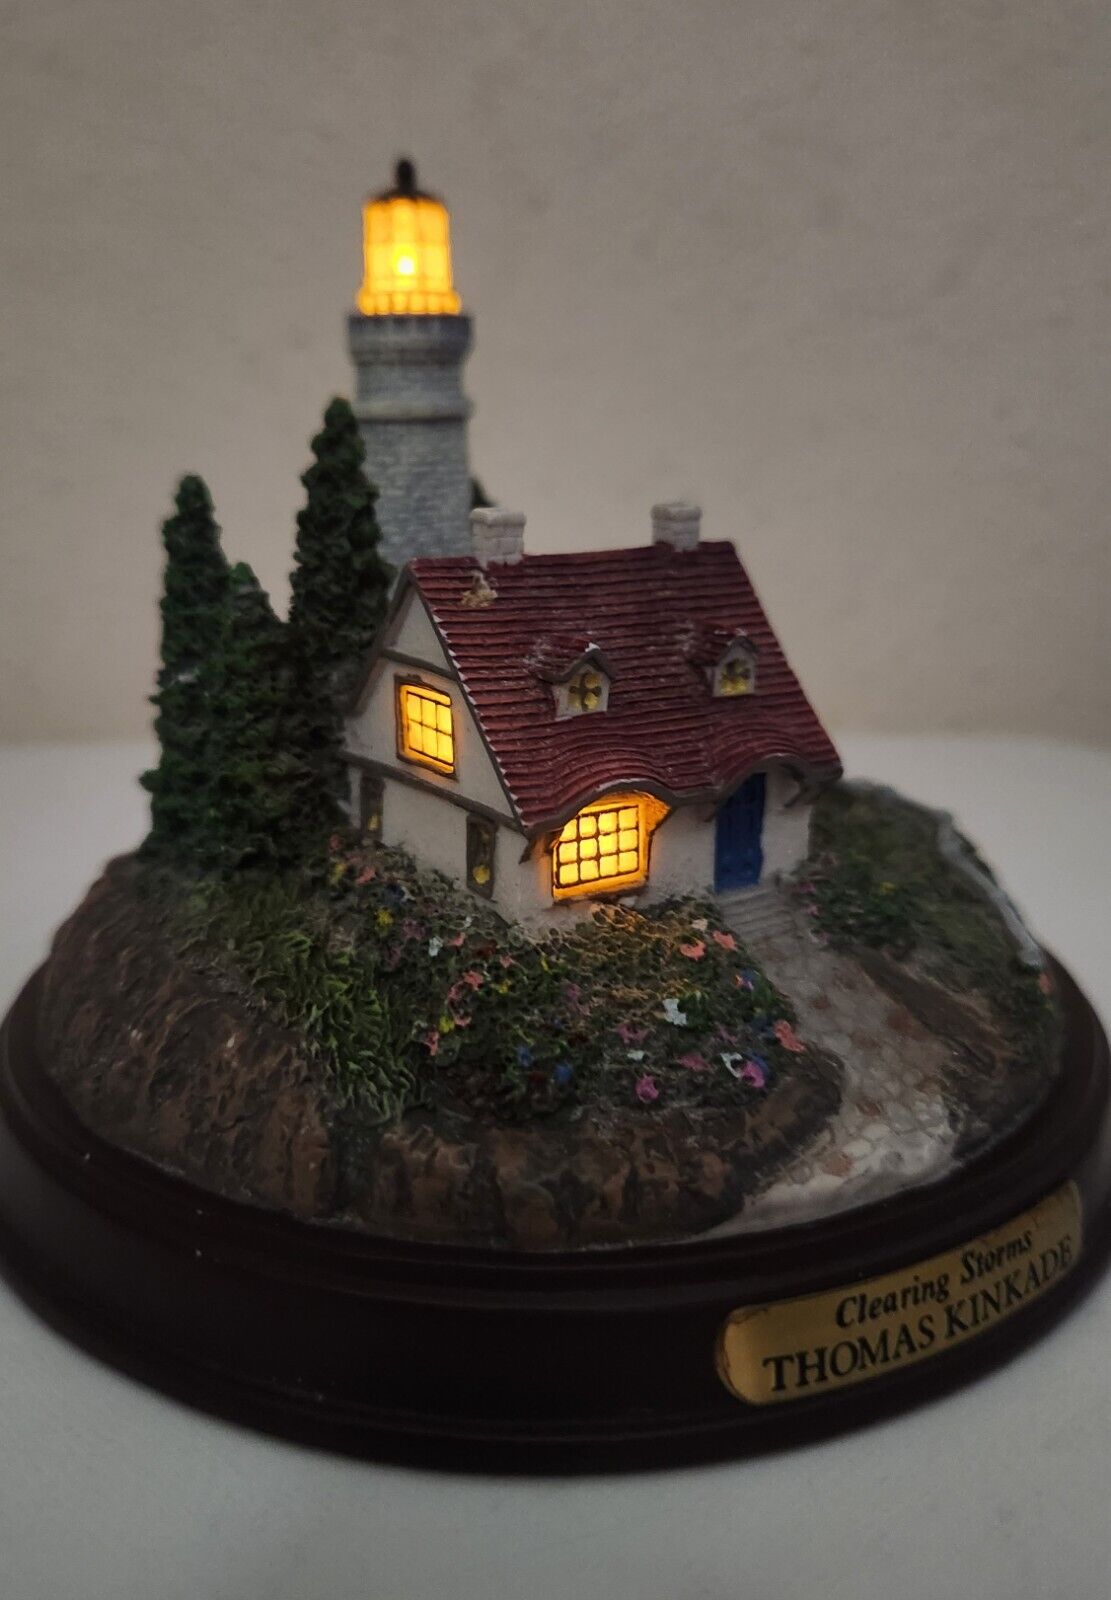 Thomas Kinkade Clearing Storms Light up Lighthouse Figure - Tested and Works